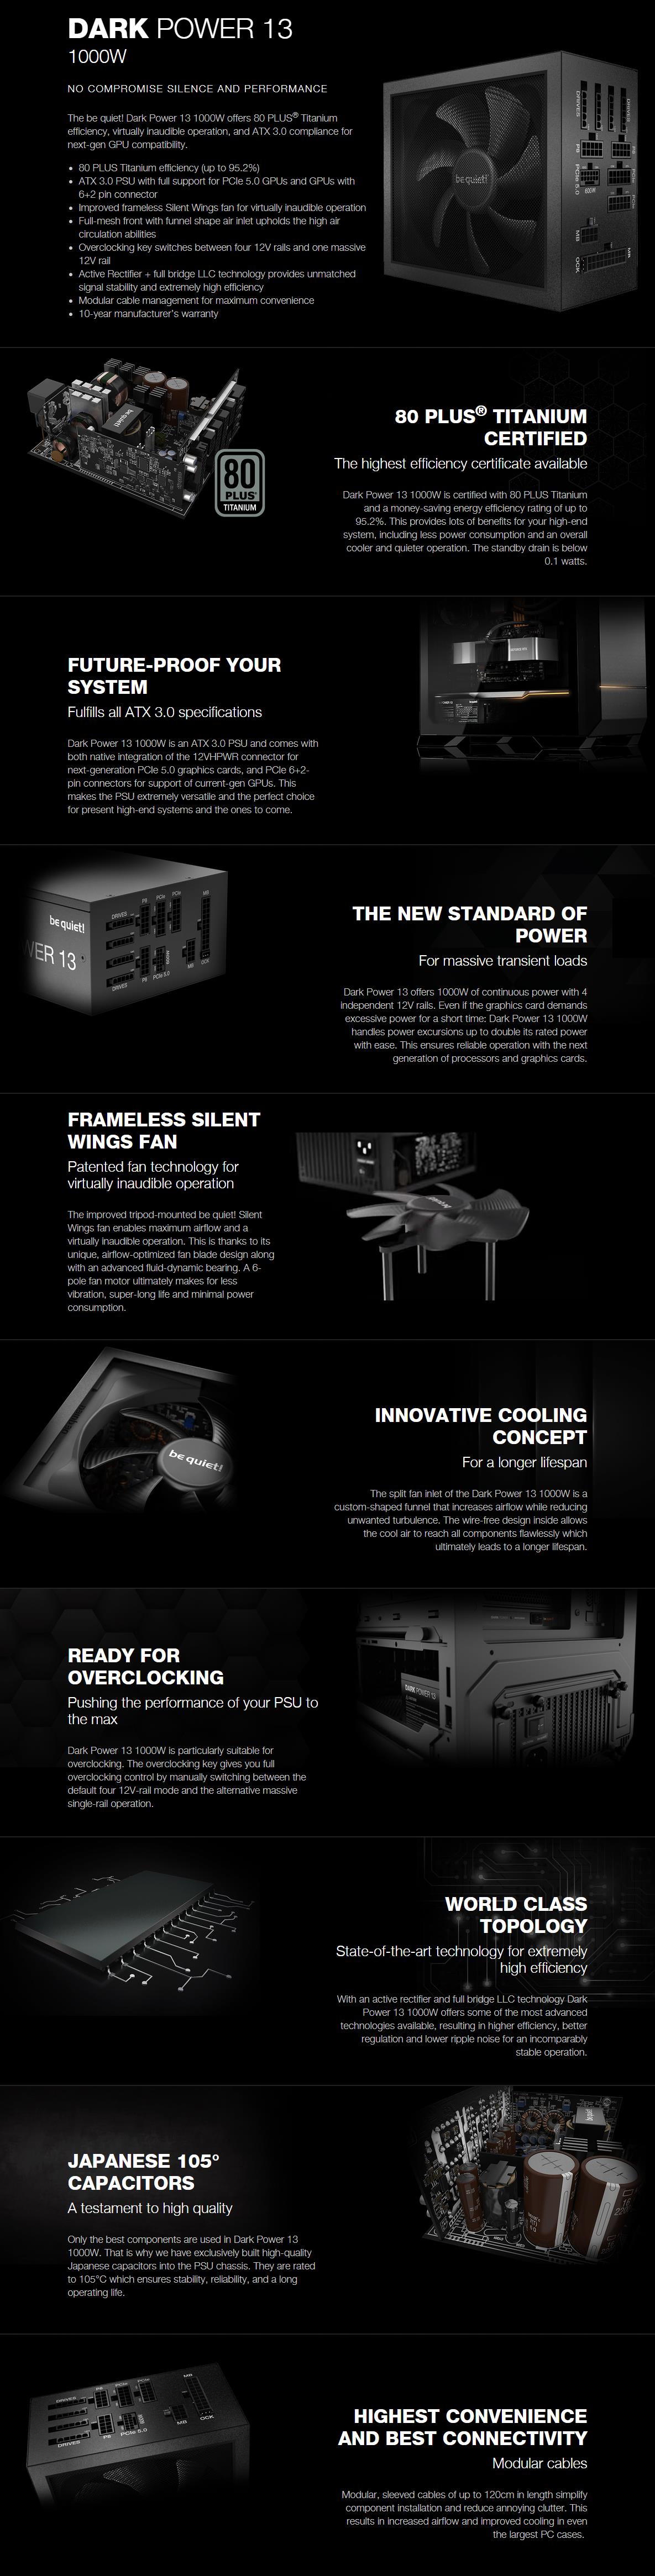 A large marketing image providing additional information about the product be quiet! Dark Power 13 1000W Titanium PCIe 5.0 Modular PSU - Additional alt info not provided